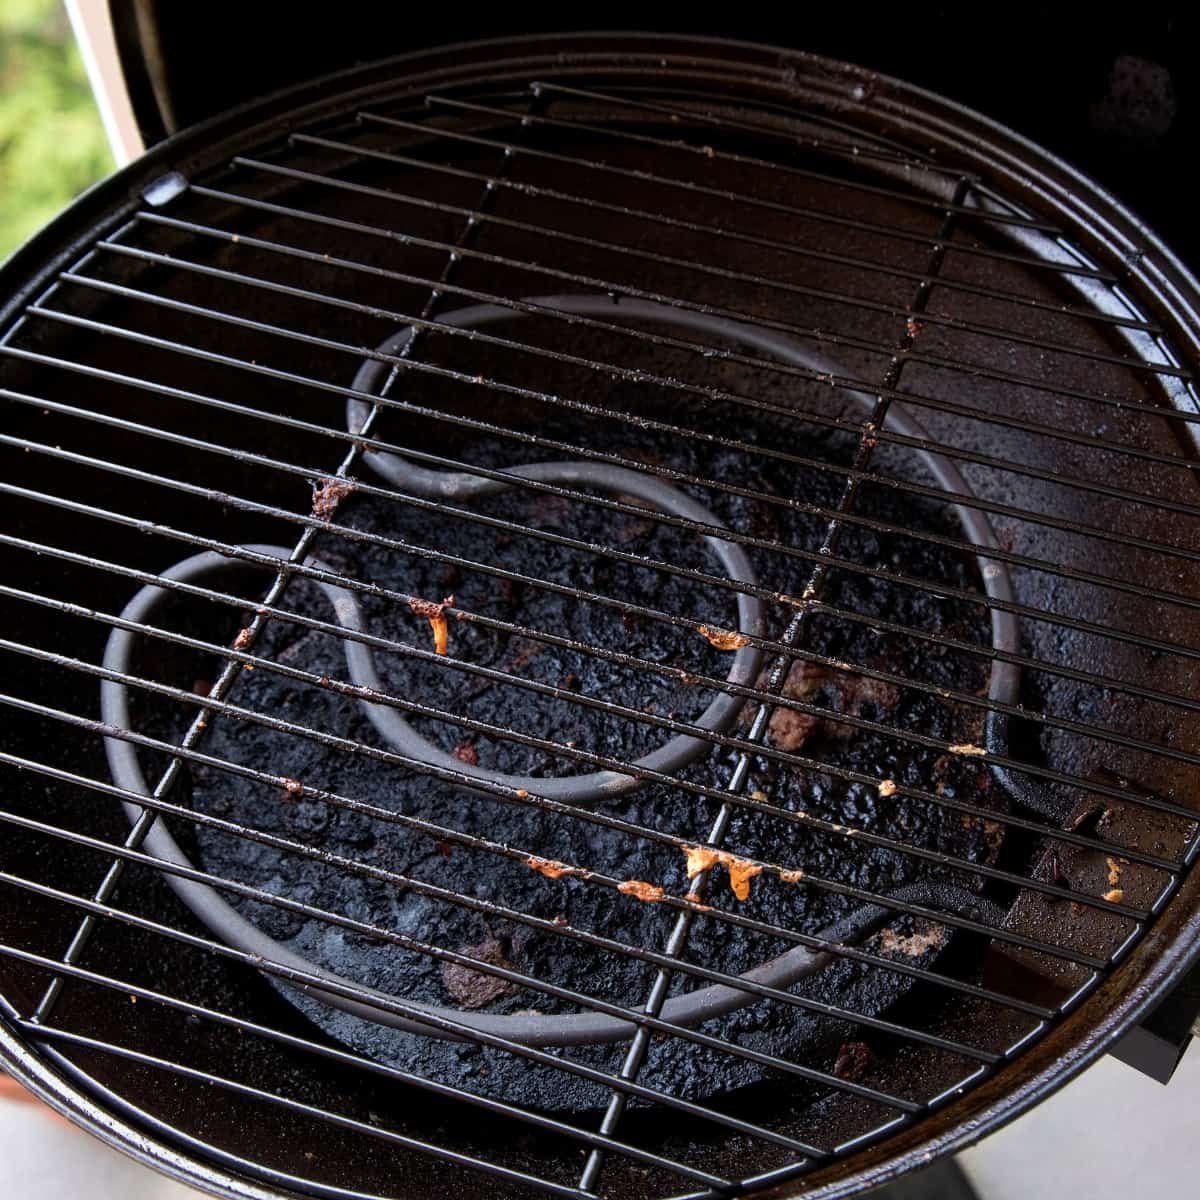 What is residue on a grill or smoker